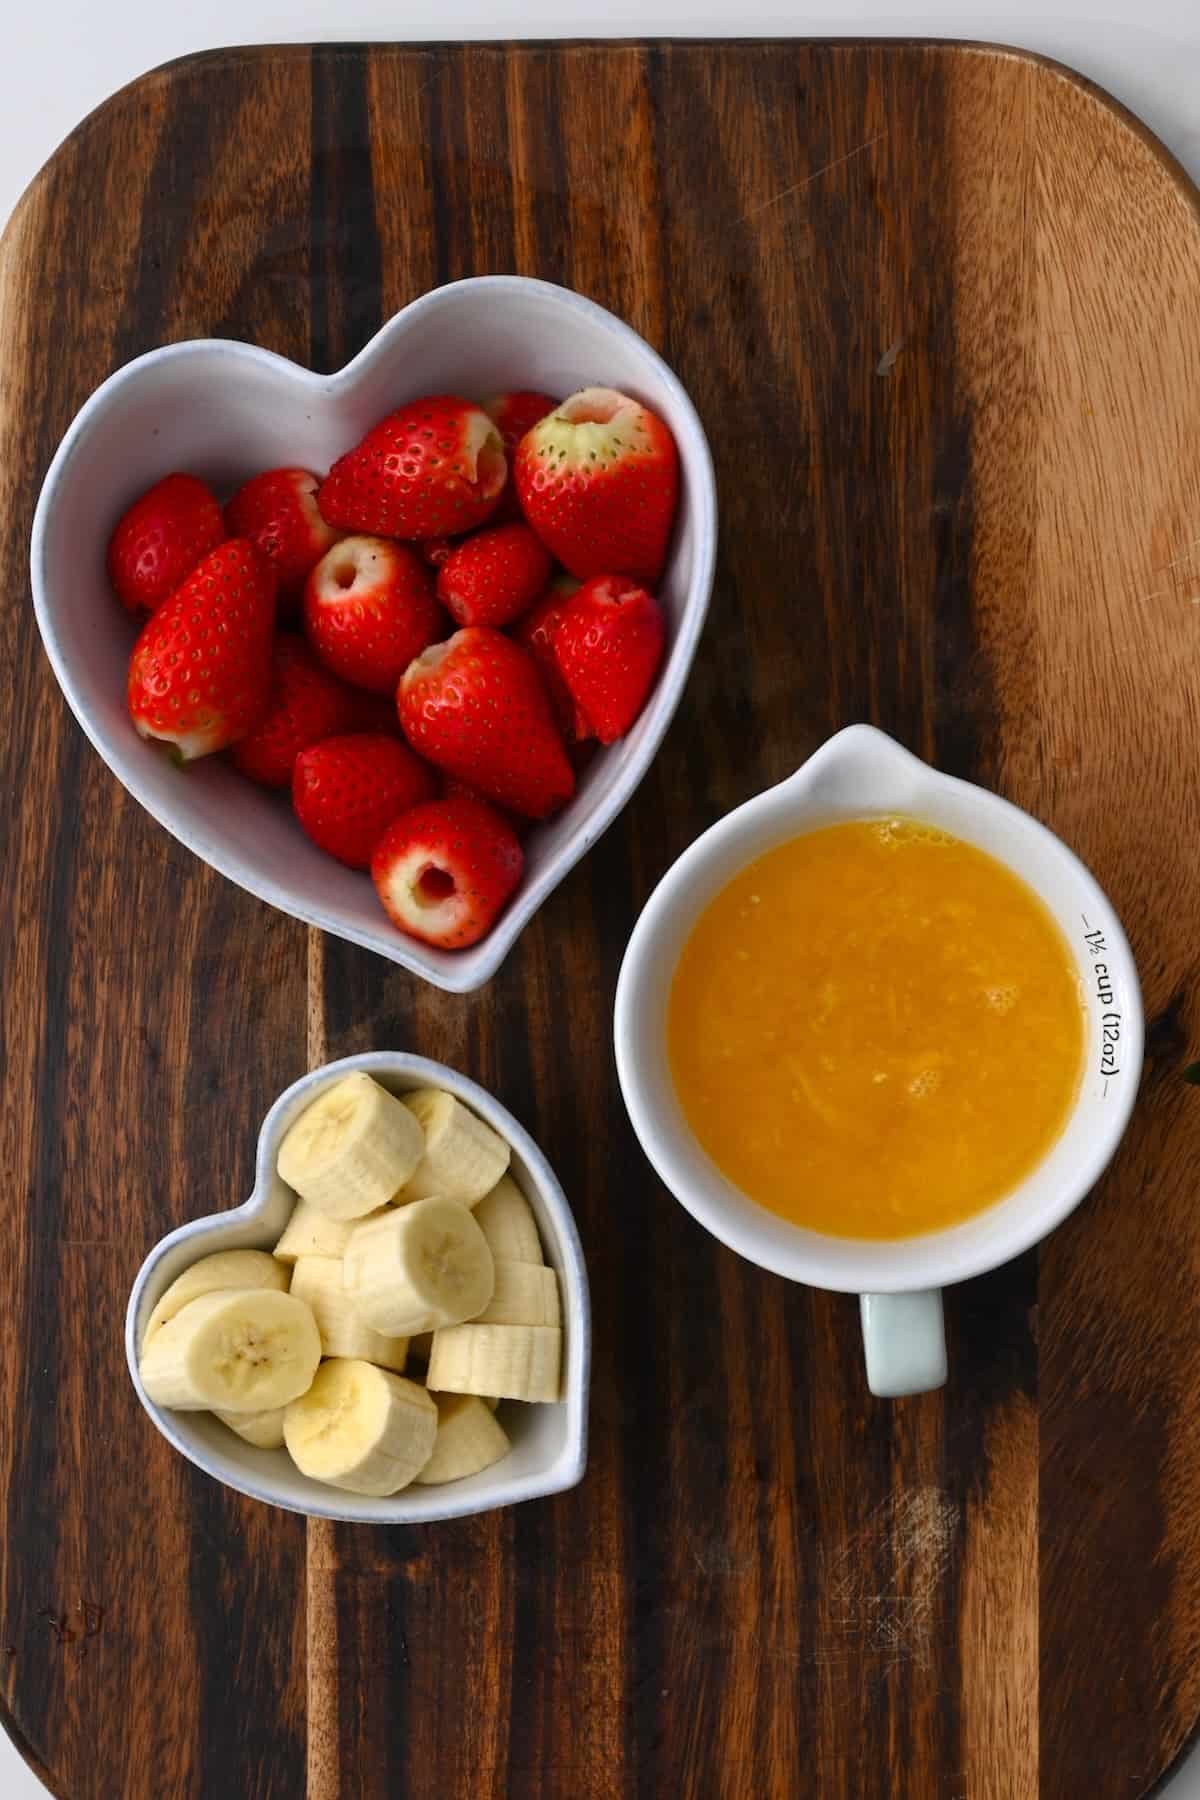 A bowl with strawberries a bowl with chopped banana and a bowl with orange juice